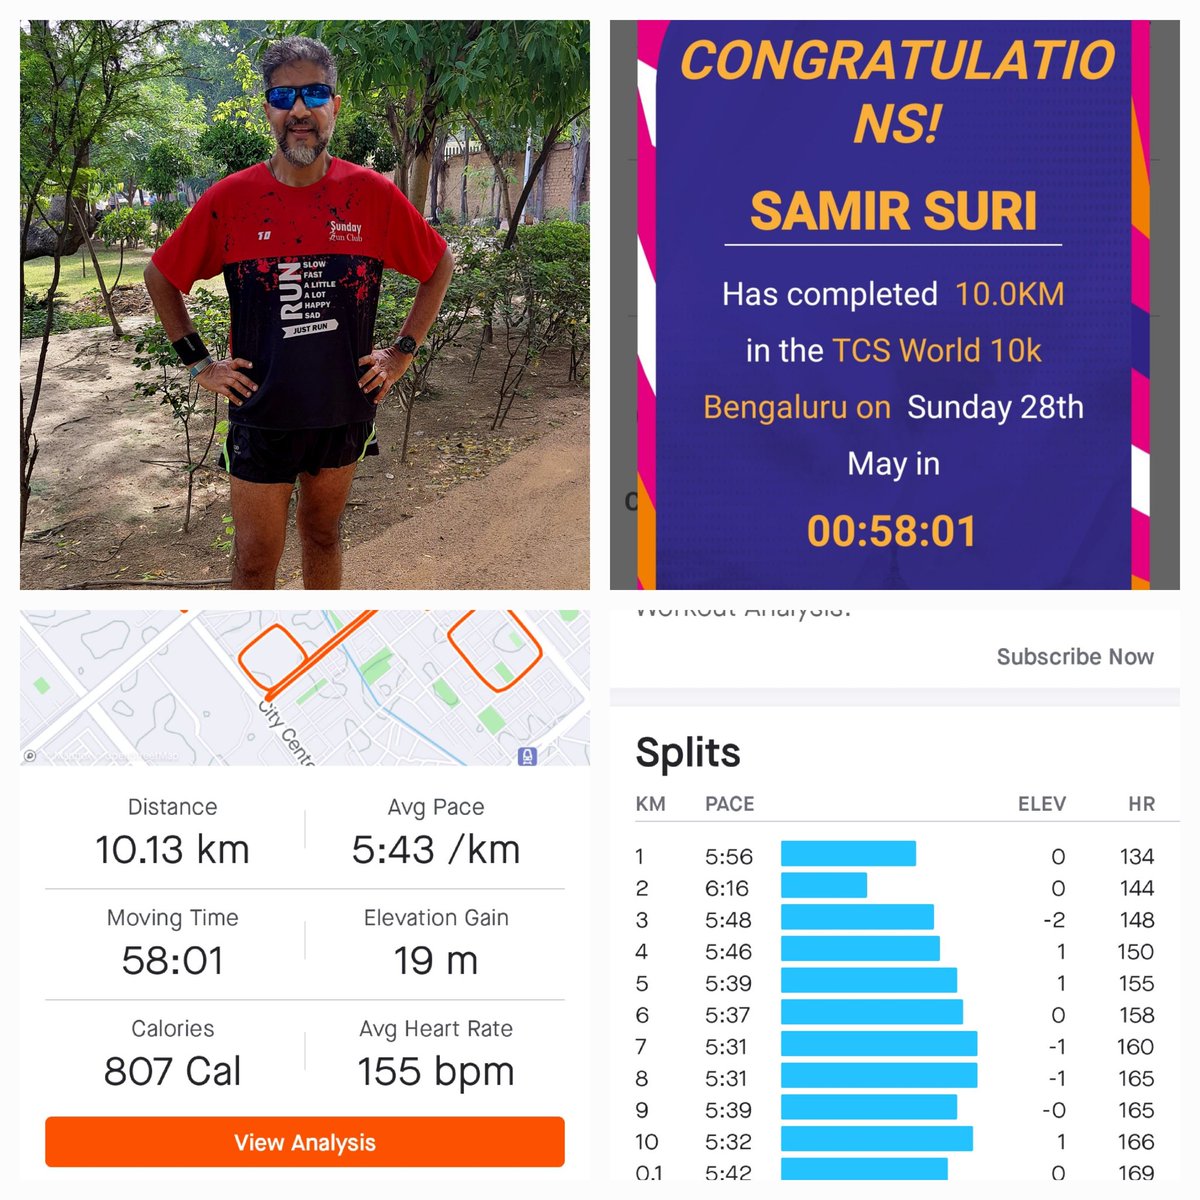 HIS GRACE To have done 10 kms under 1 hour.Gratitude Always. Thank you. Keep showing up-whatever it takes. #AdmireYourself #Gratitude 
#TCSW10K #ComeAlive